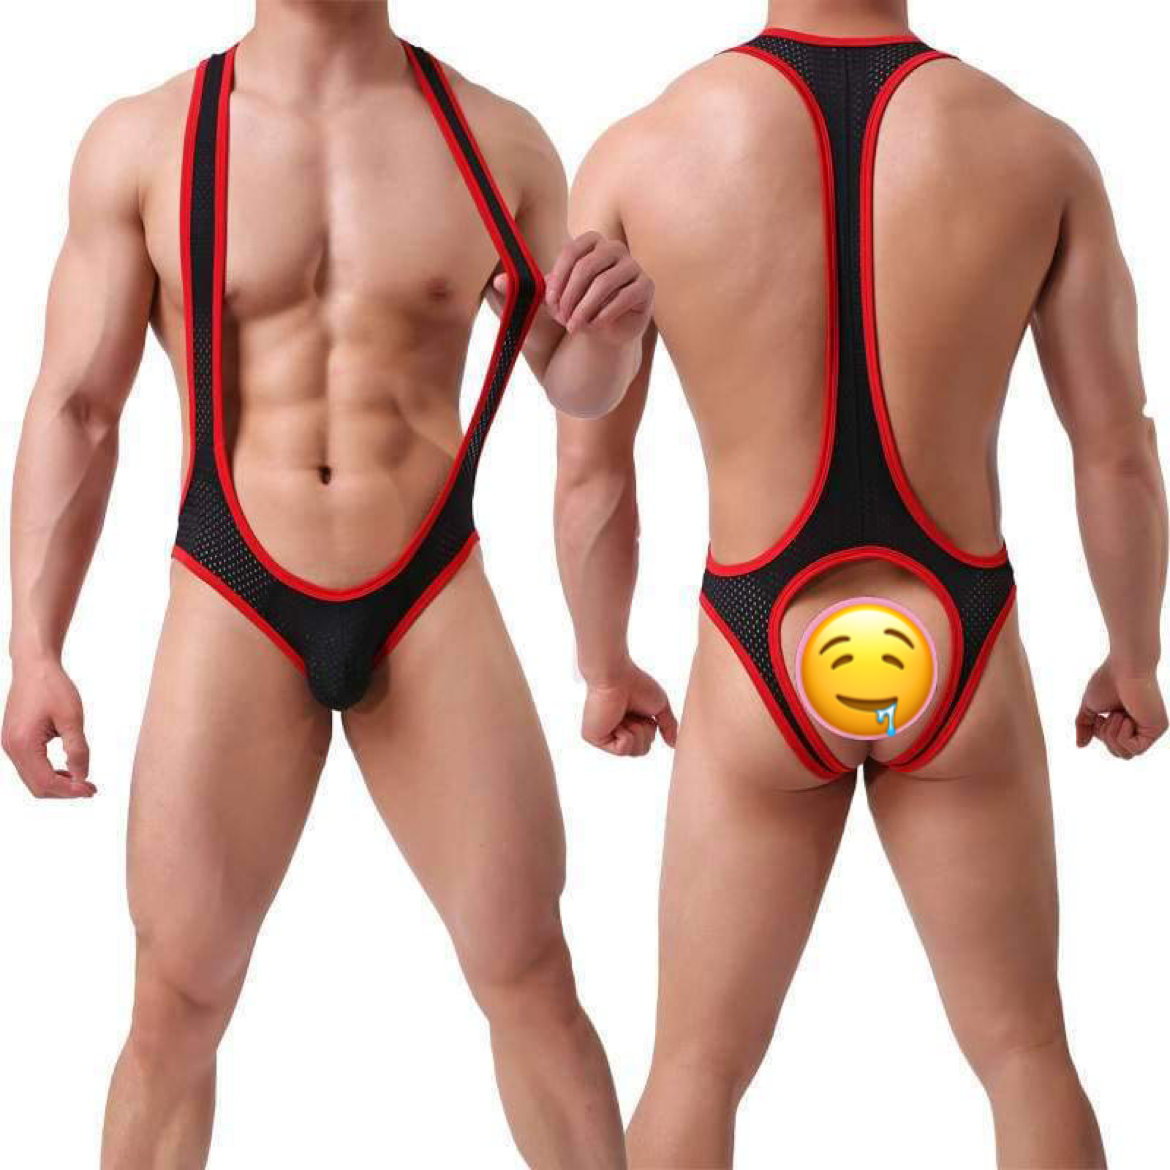 Stylish singlets or wrestling costumes with bare bottoms. Available in many colors.